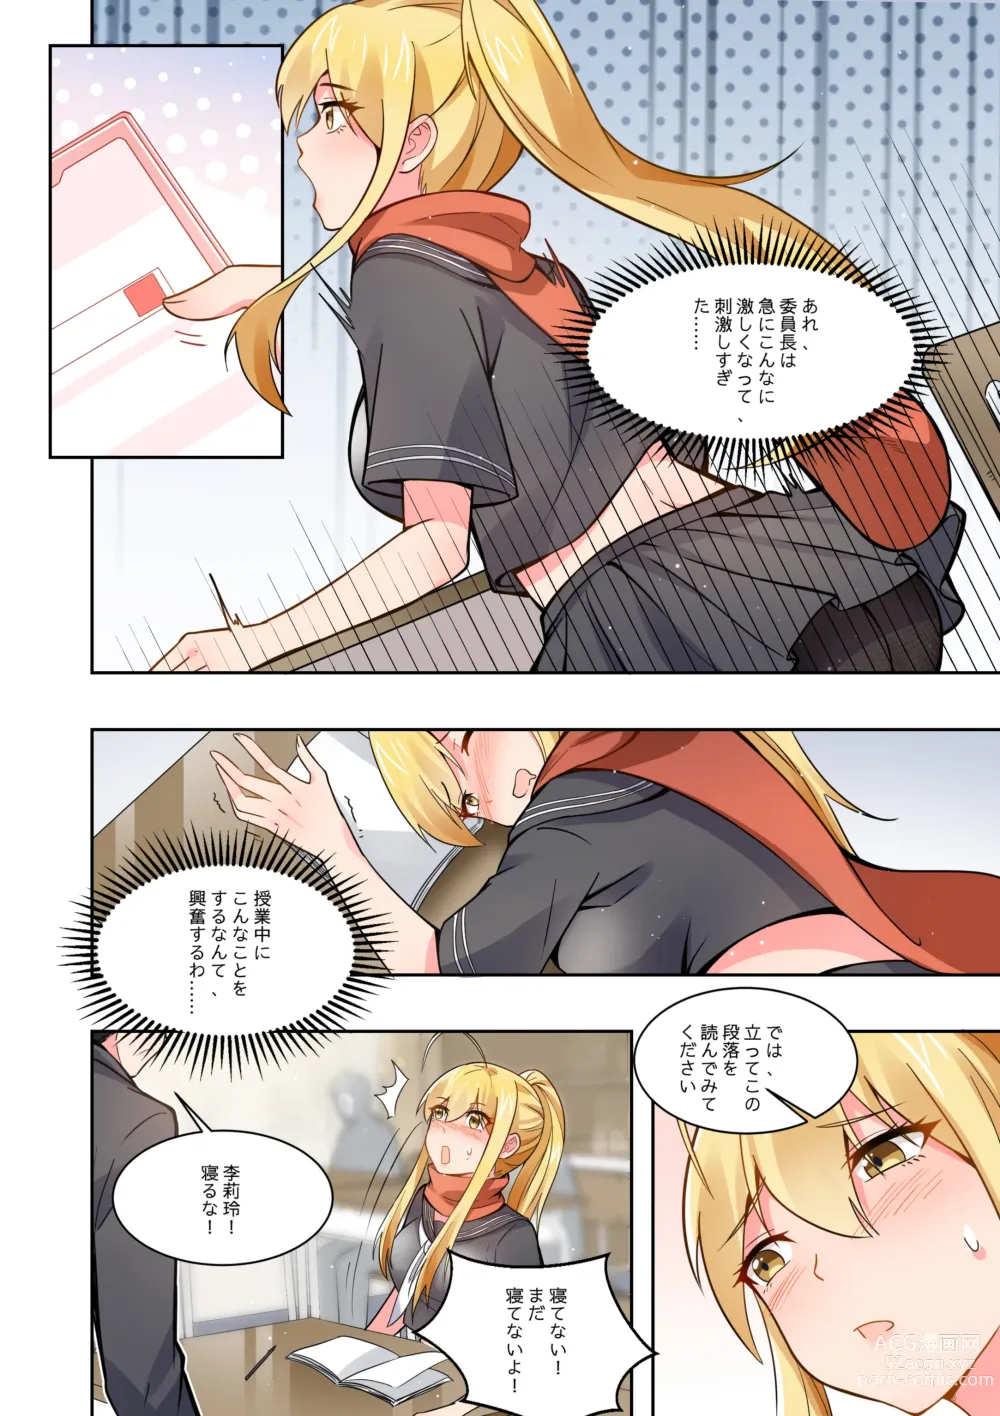 Page 23 of doujinshi ノーパン彼女